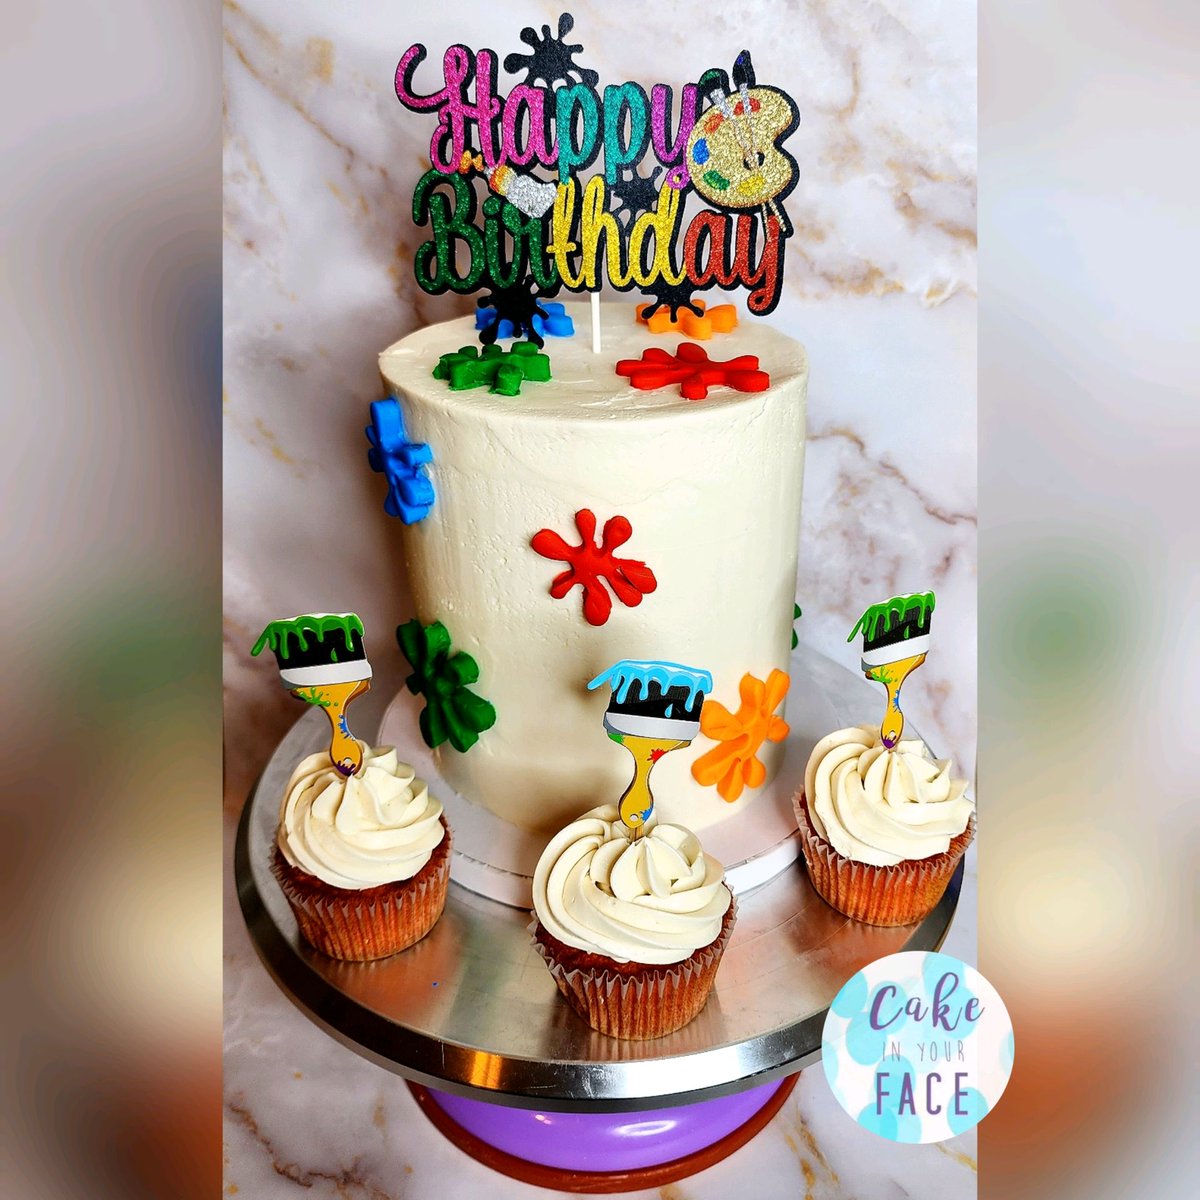 Sharing the sweetest thing from our recent paint party-themed cake! It's the perfect addition to any special occasion. Add some color and fun with this beautiful masterpiece. #paintparty #cake #paintitup #colorfulcake